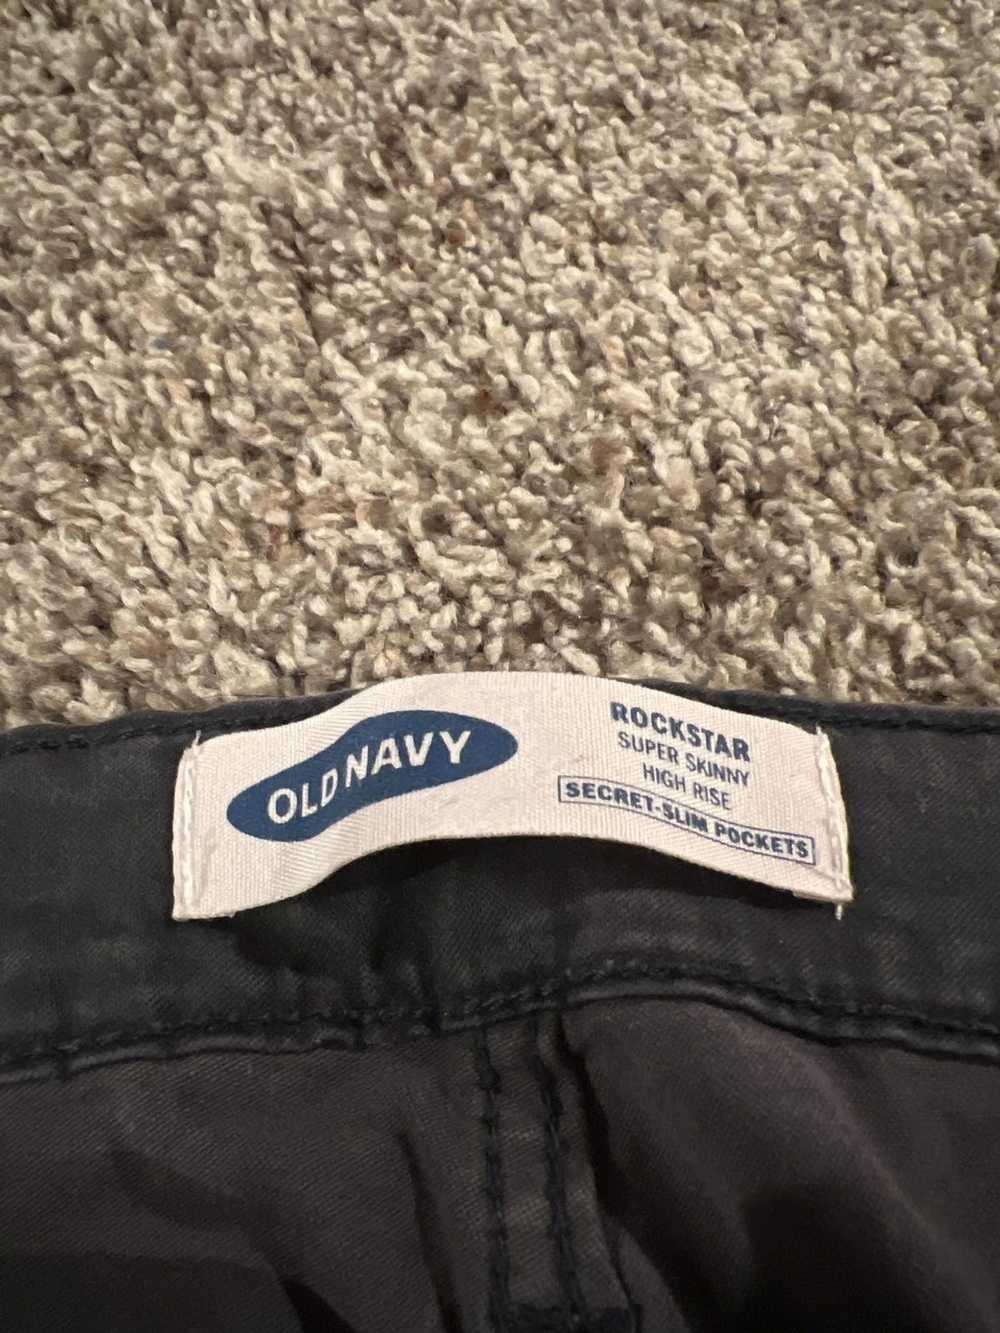 Old Navy Blue cargo pants - image 4